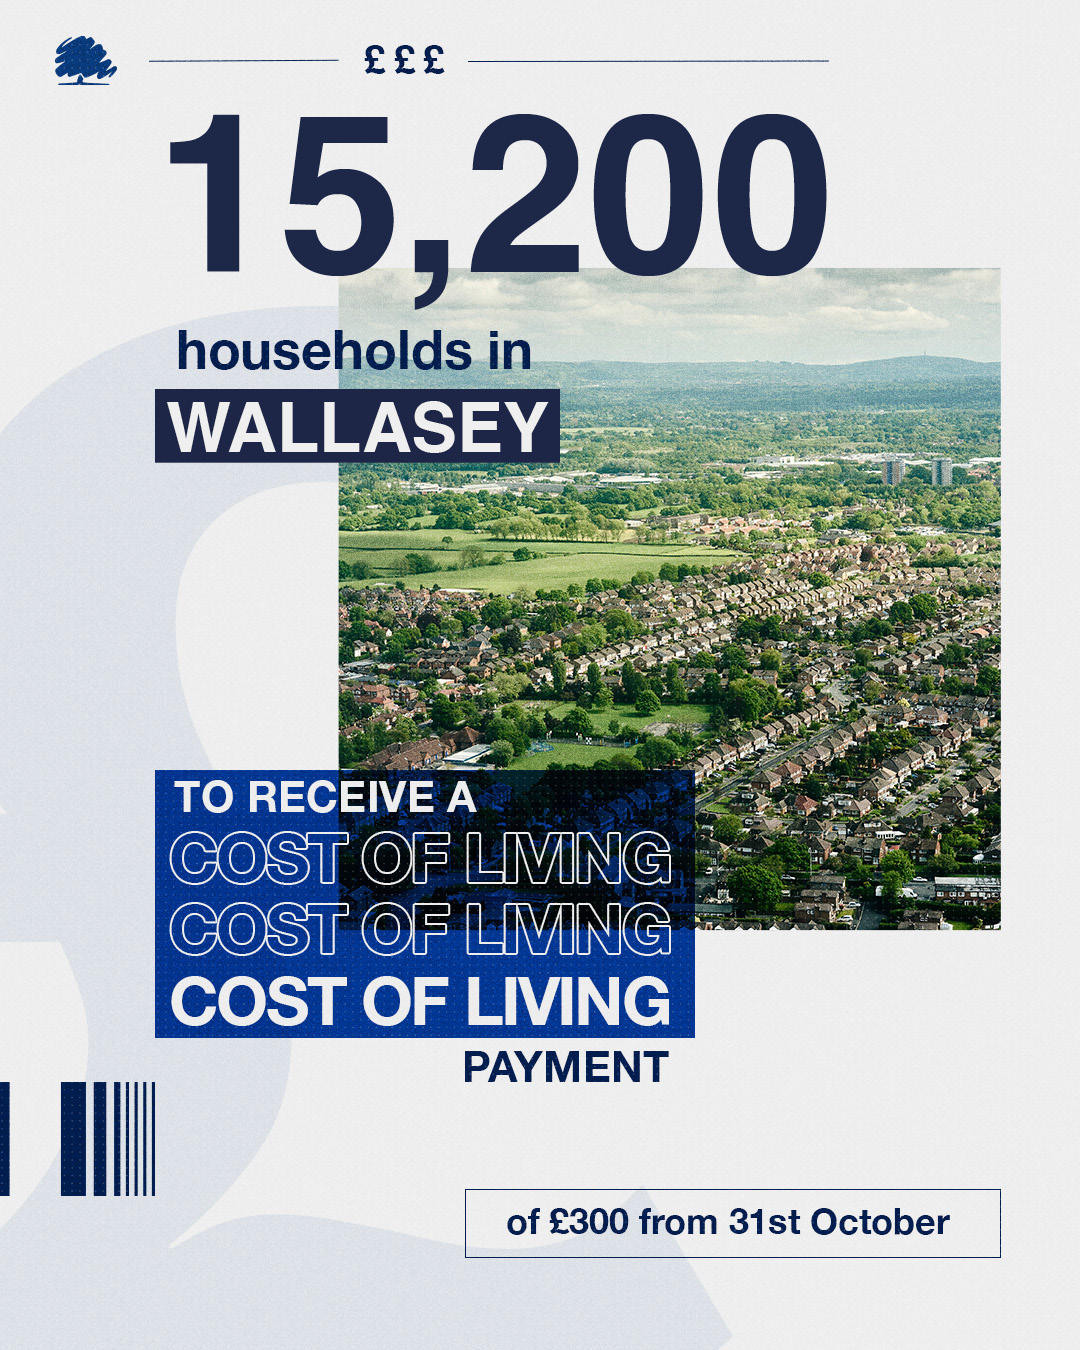 Cost of Living payments